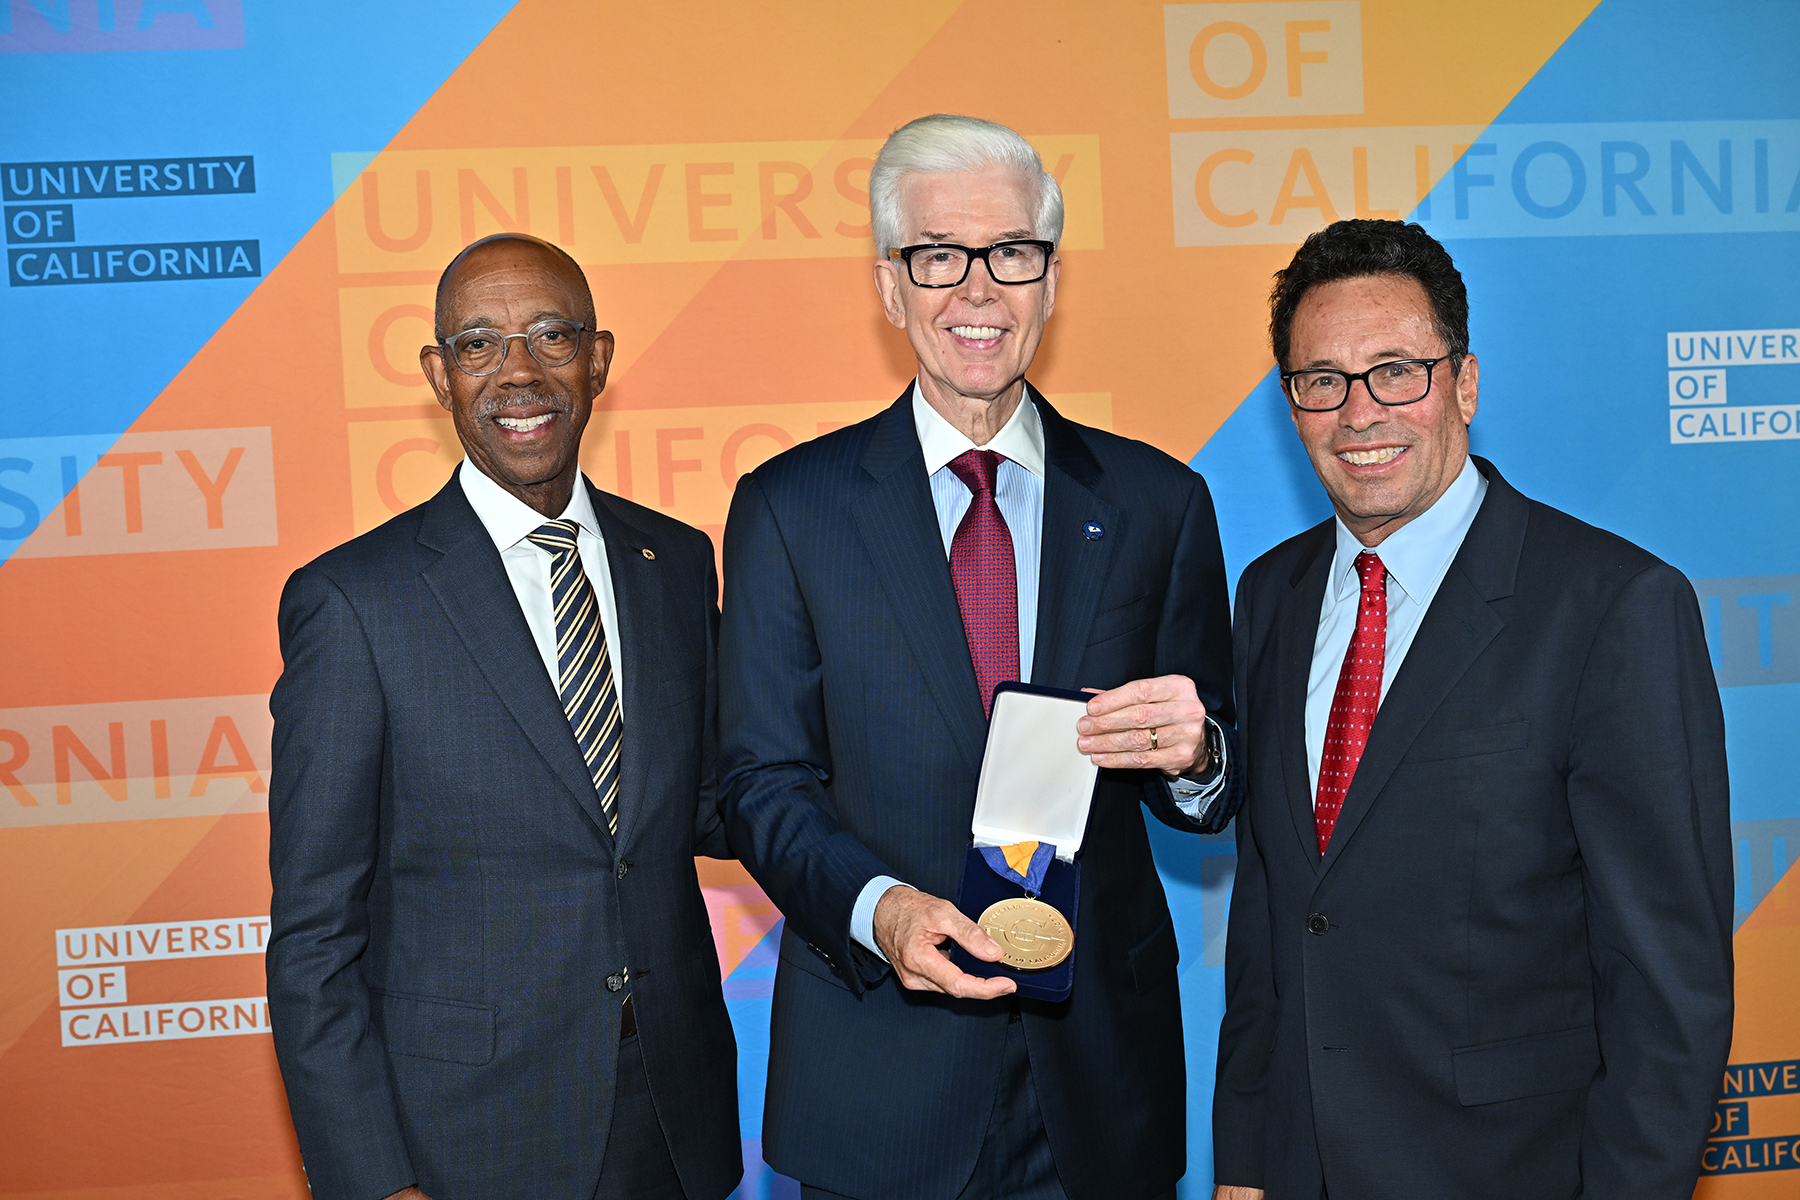 From left to right, President Drake, former Gov. Gray Davis and UC Board of Regents Chair Richard Leib at an event honoring Gov. Davis held on Sept. 20 at UCLA.